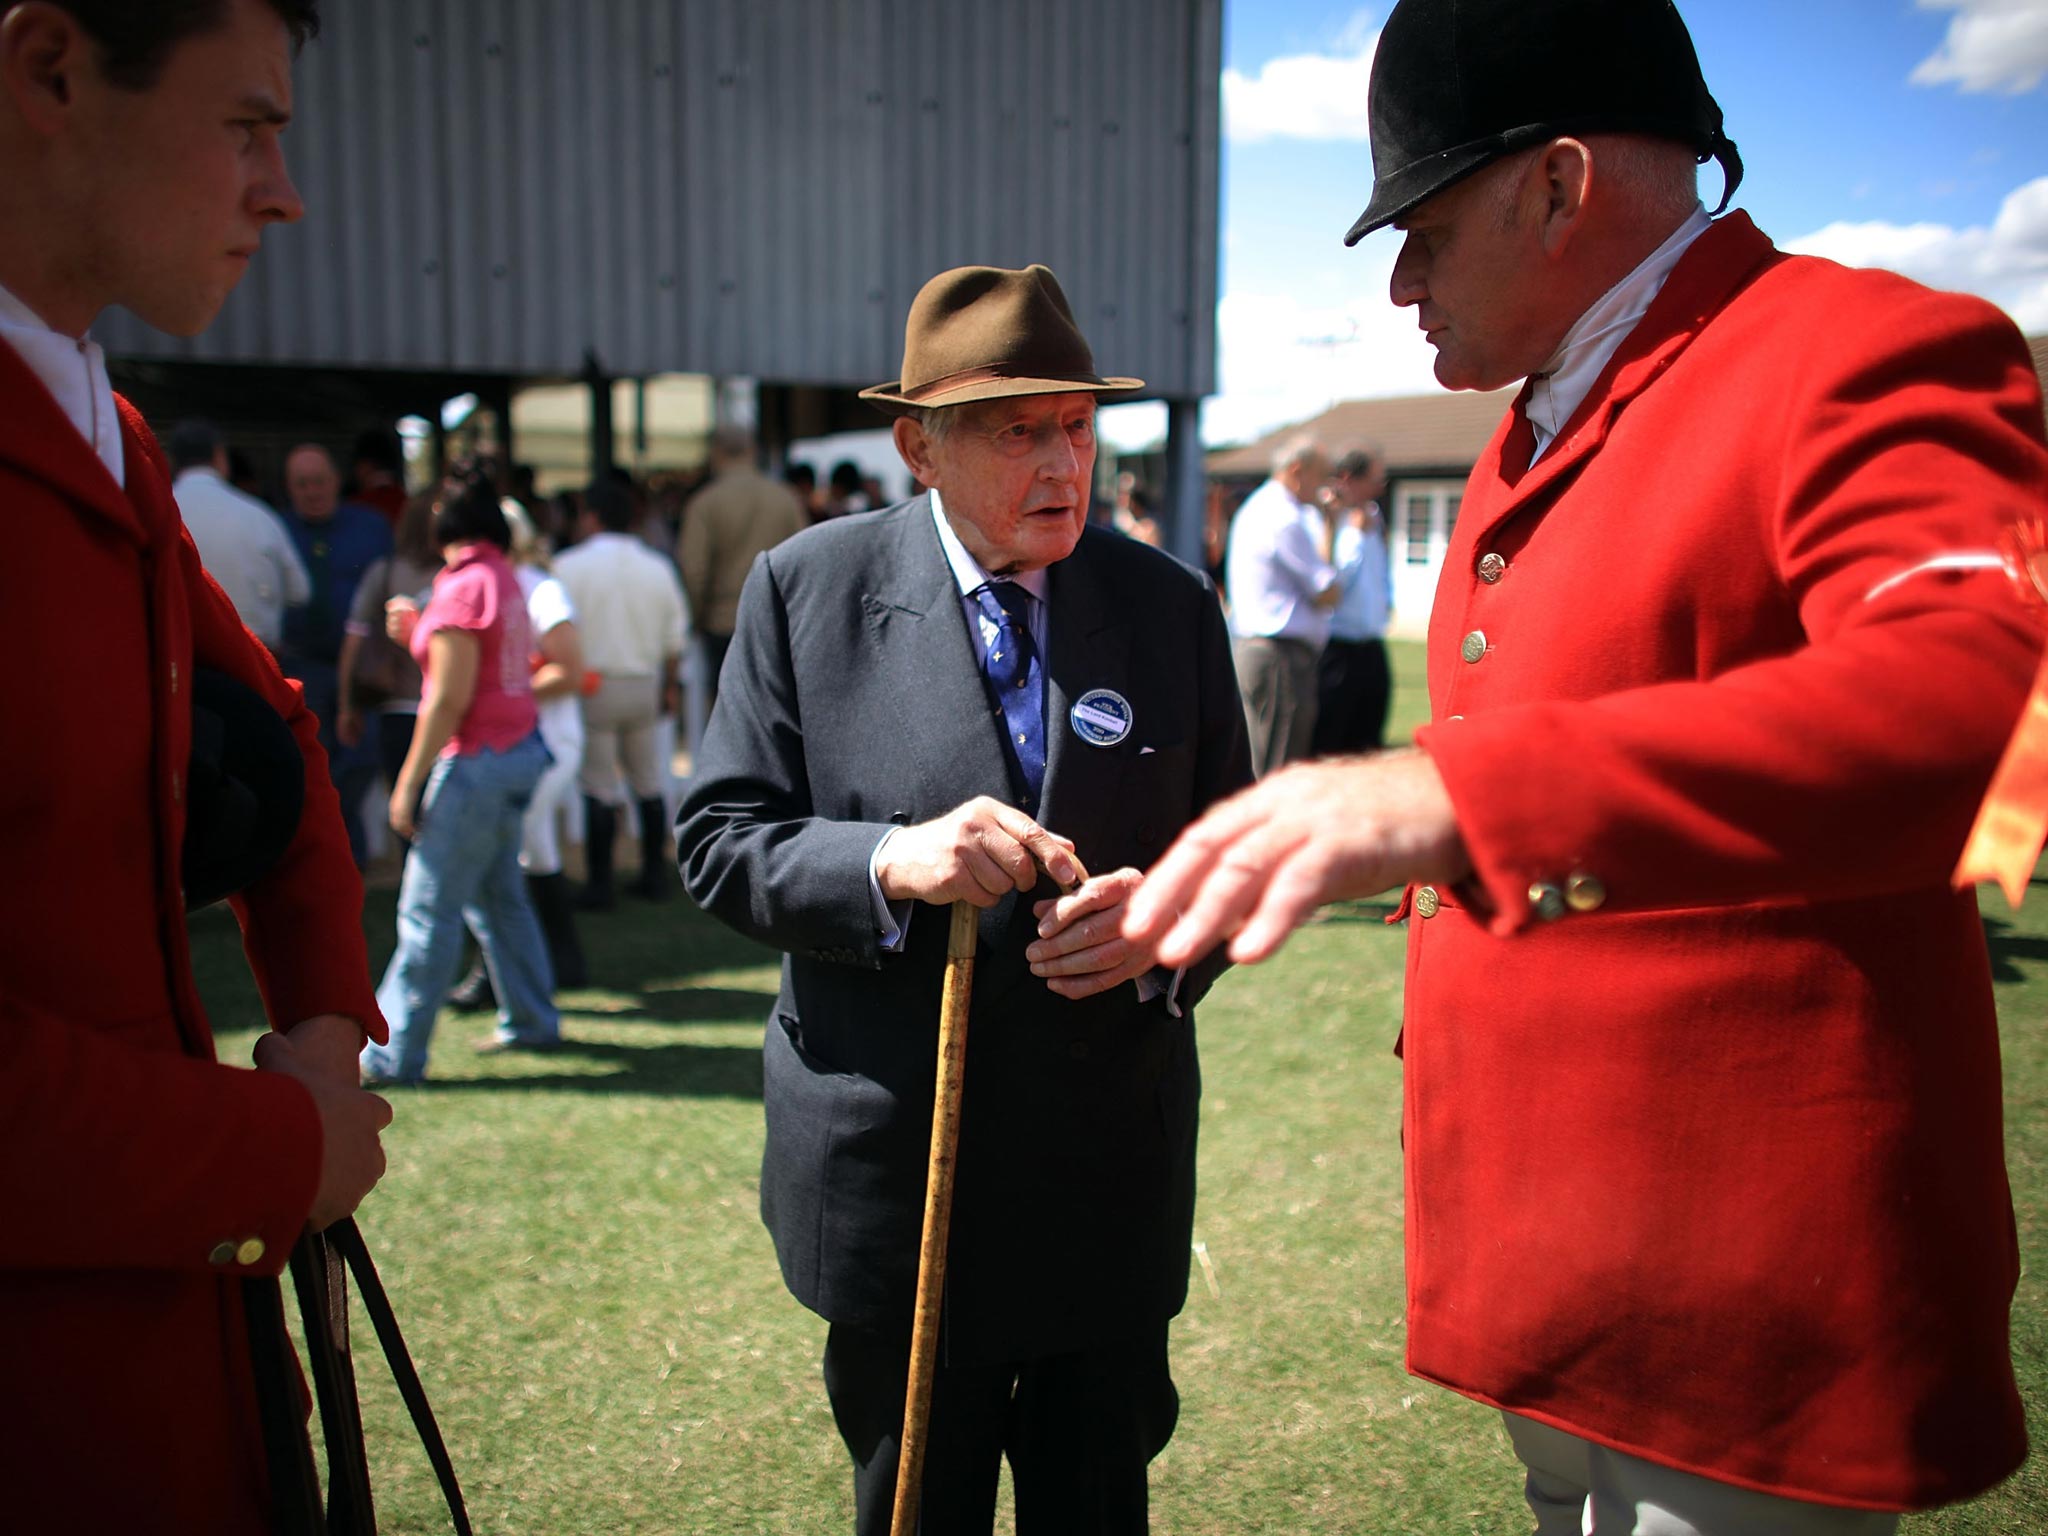 Kimball chats to huntsmen during the Peterborough Festival of Hunting in 2010